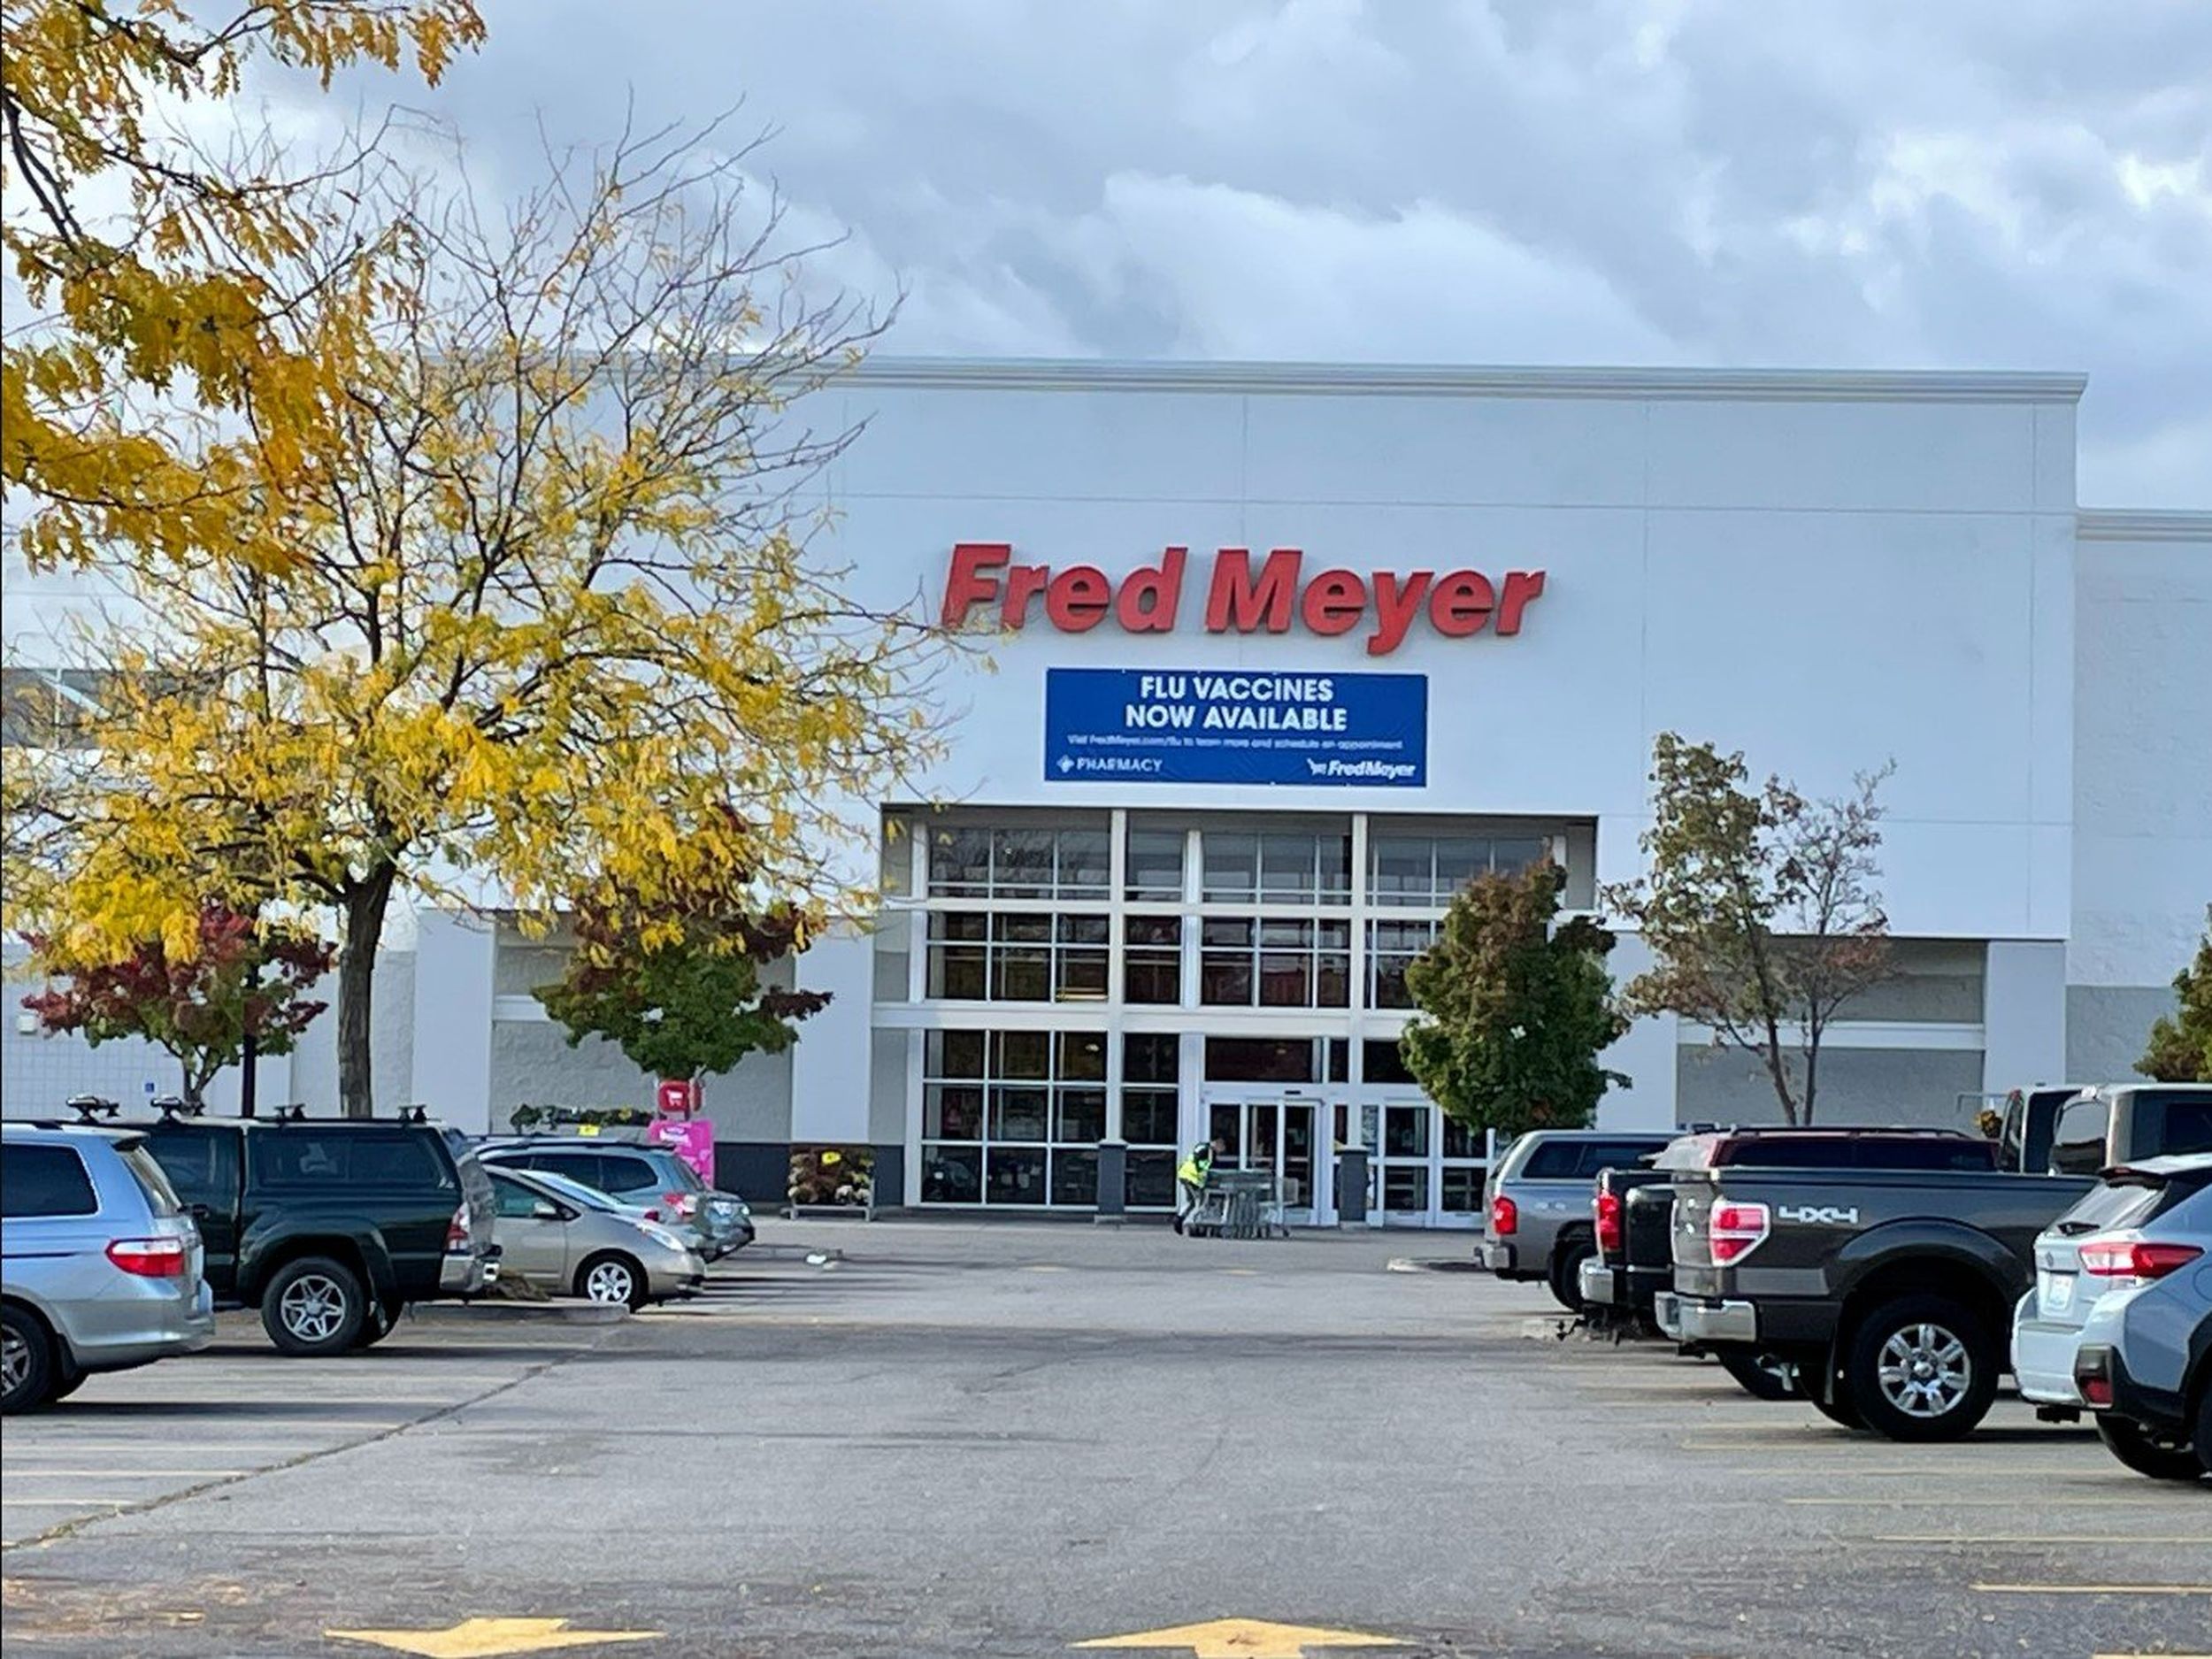 No plans for closure at Thor Fred Meyer, despite claims of increased crimes